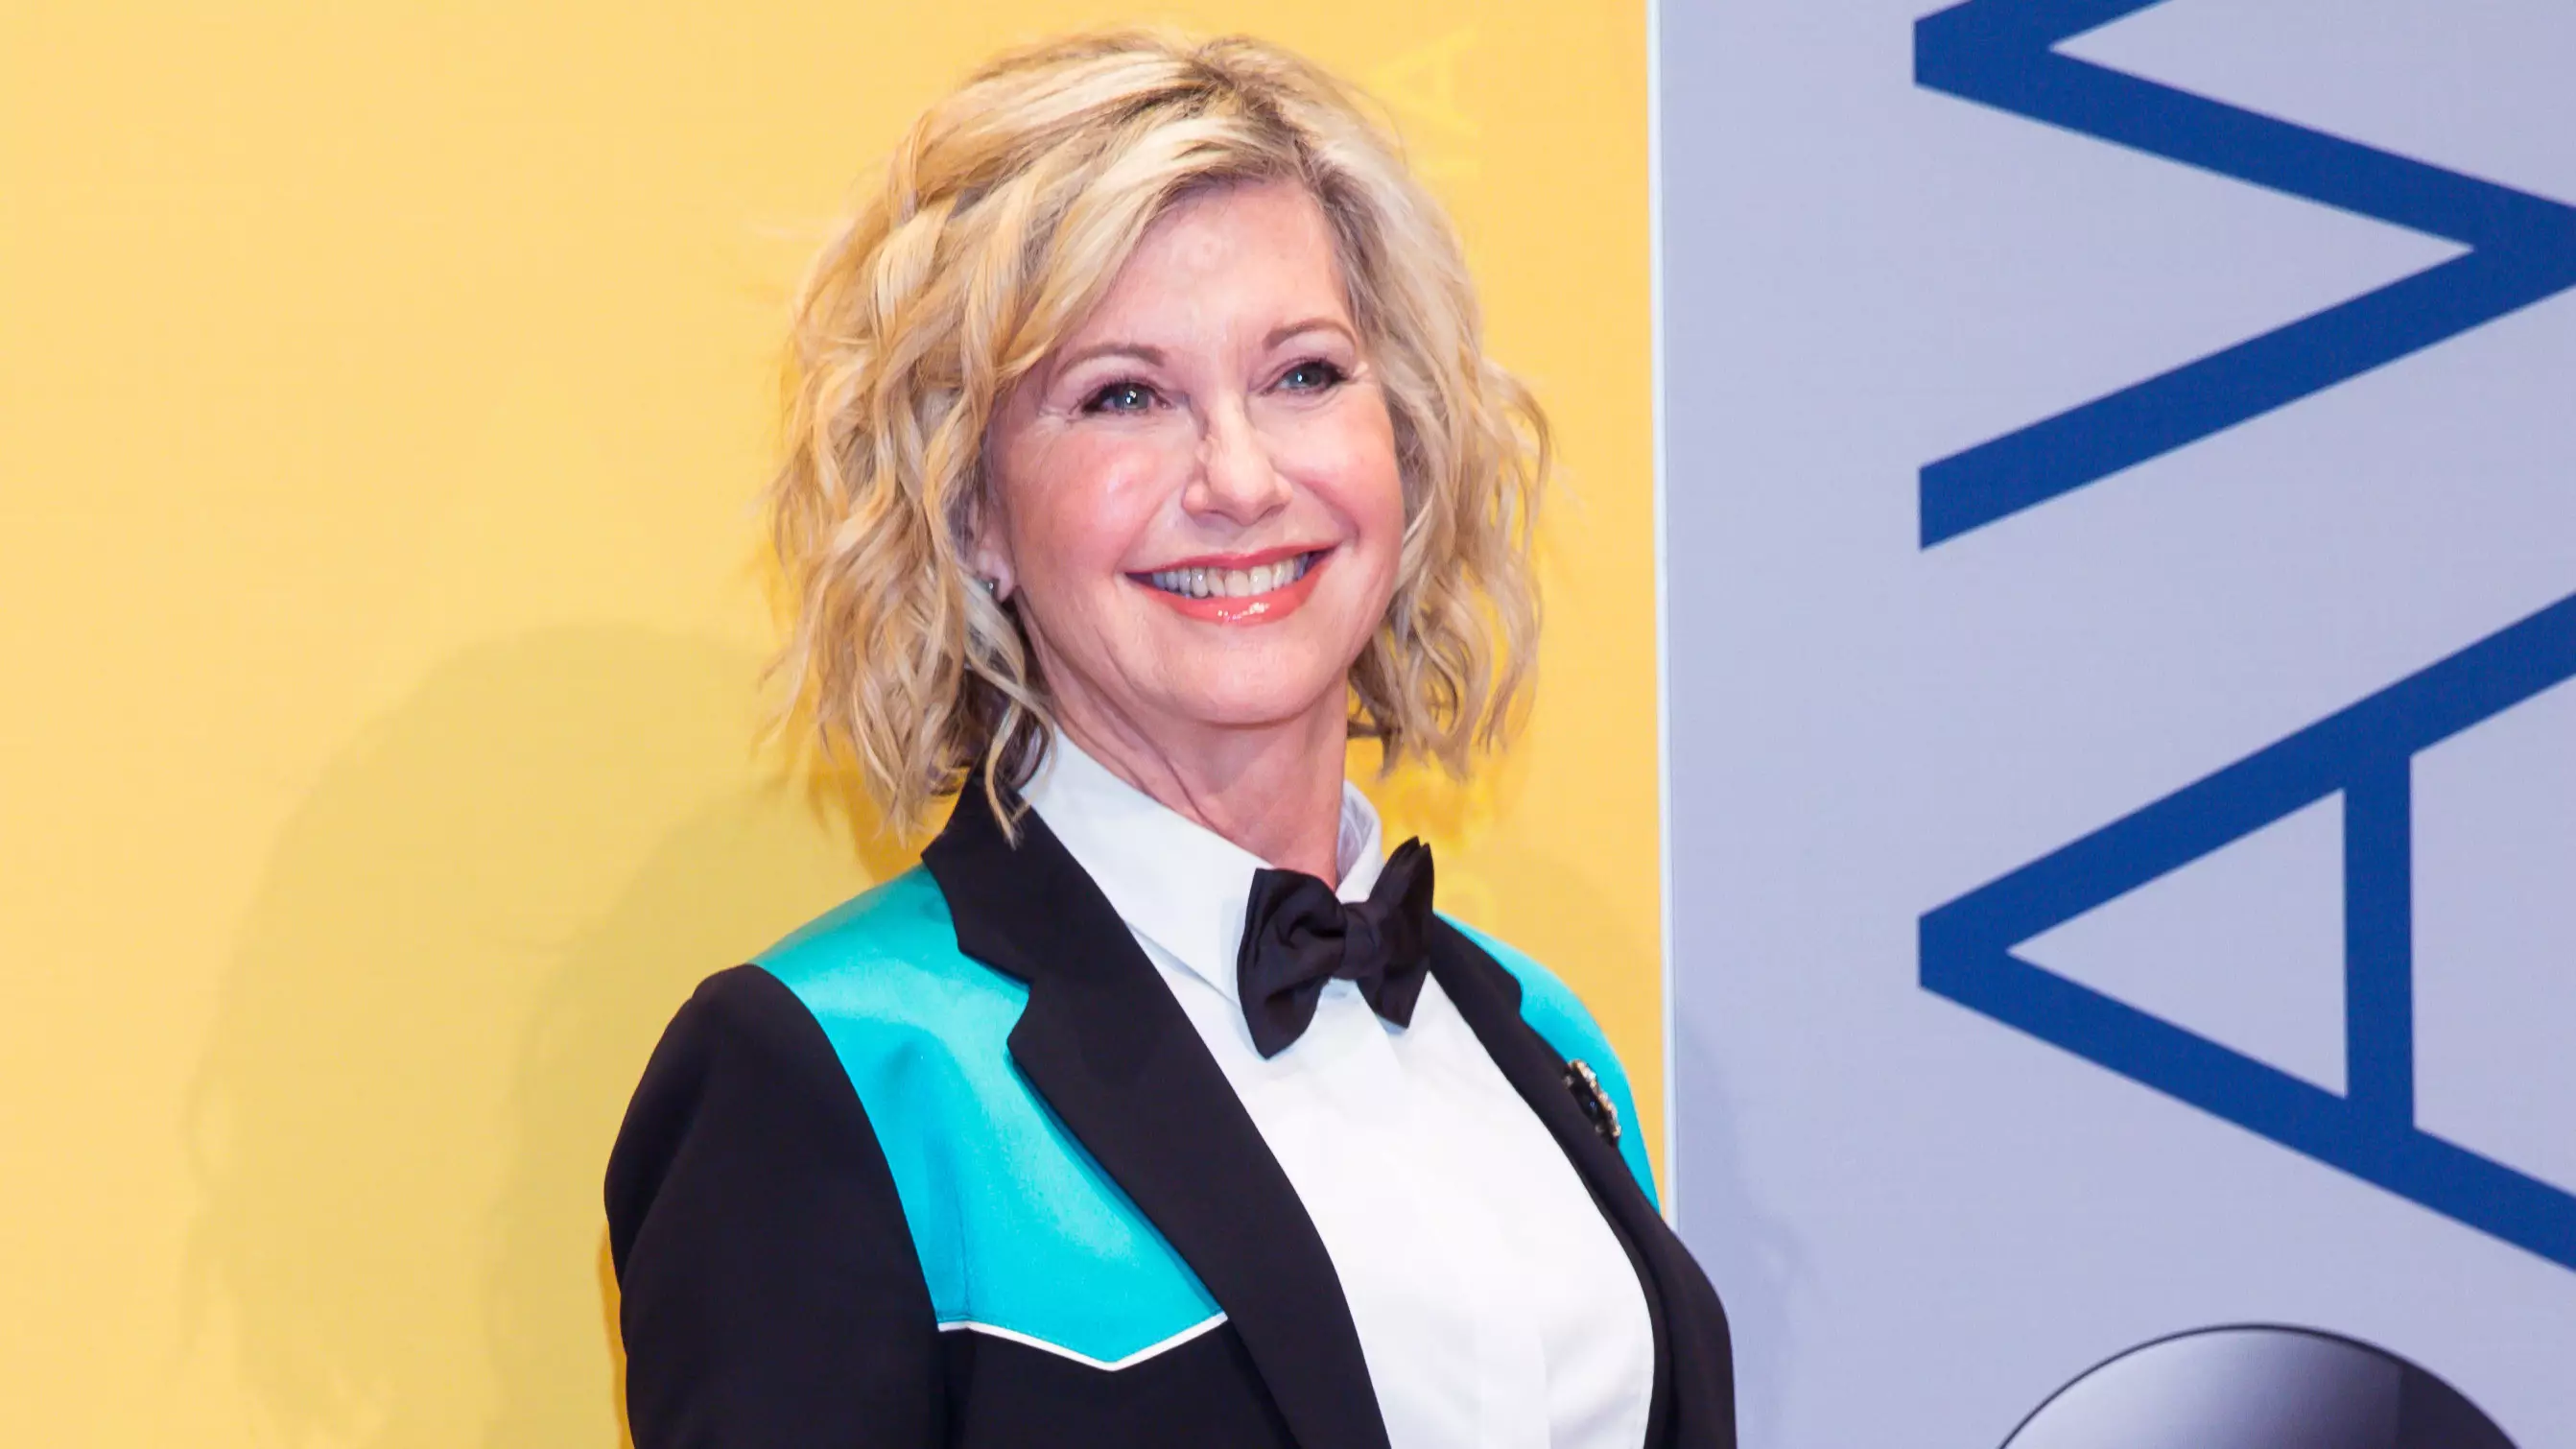 Olivia Newton-John's Manager Describes Reports She's 'Dying' As 'Laughable'